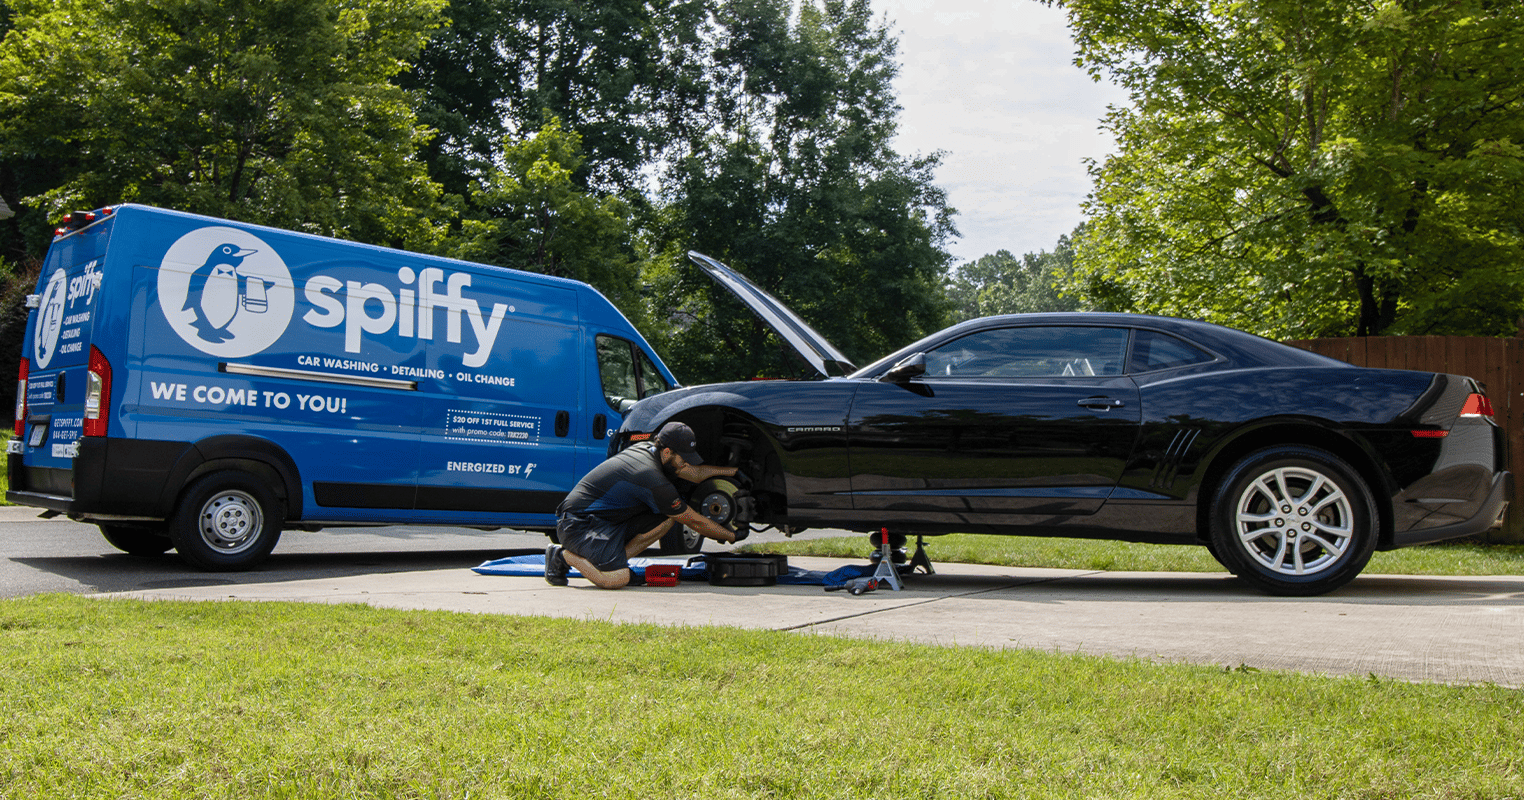 Get Spiffy now does mobile brake service in 17 markets